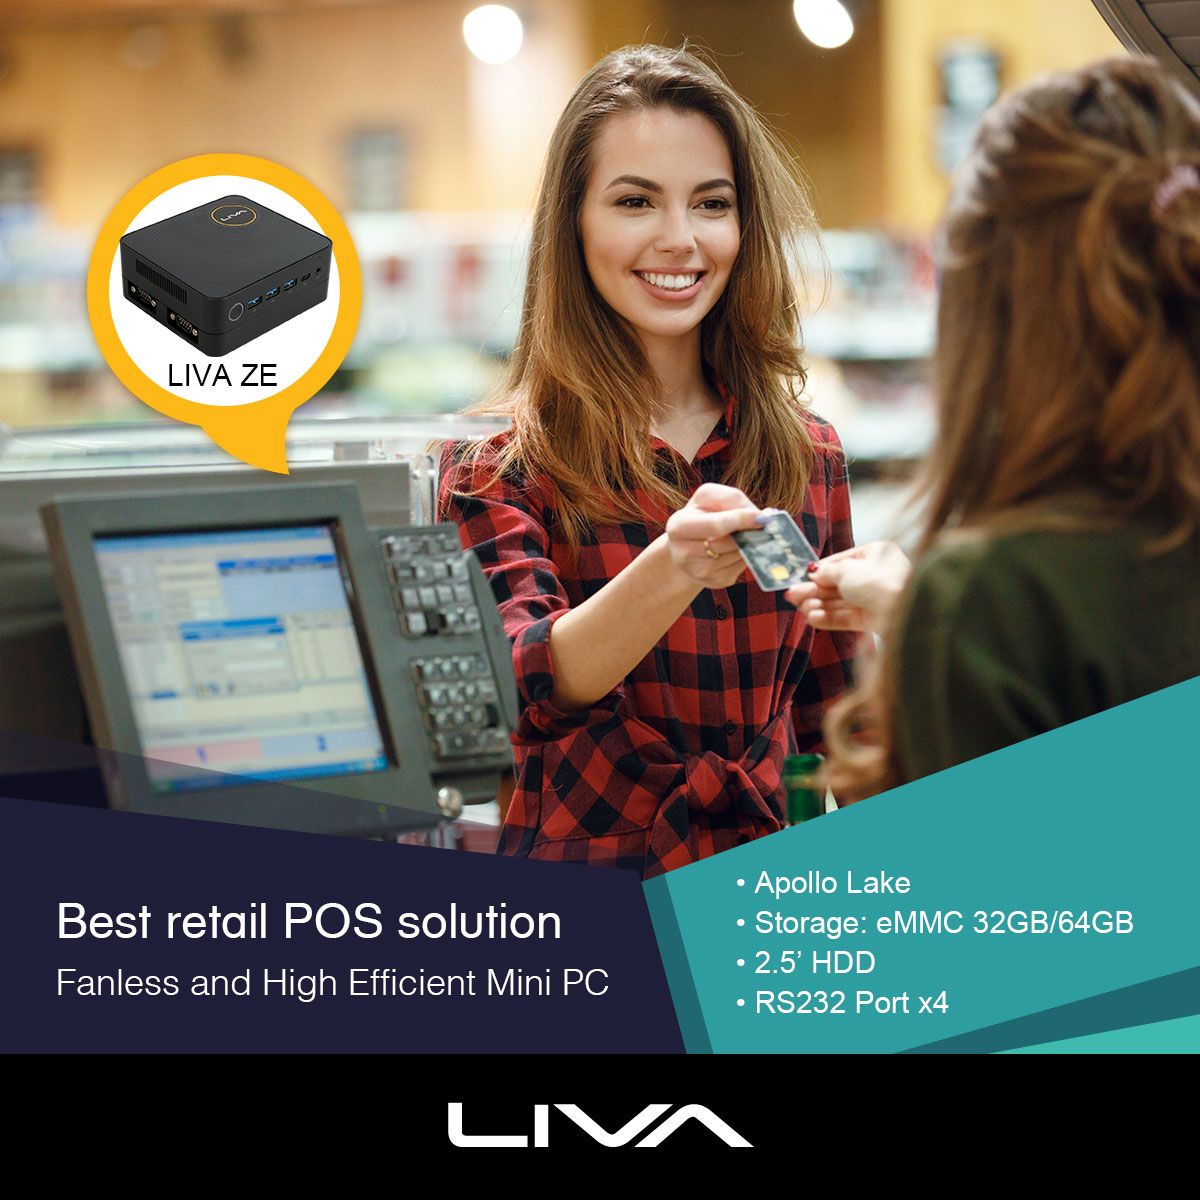 Ecs Elitegroup Liva Mini Pc Can Help The Manager Of Stores To Collect And Analyze Purchase Behaviors To Uplift The Marketing Strategy For Sales More Info T Co Aoap46baas Liva Livaze Minipc